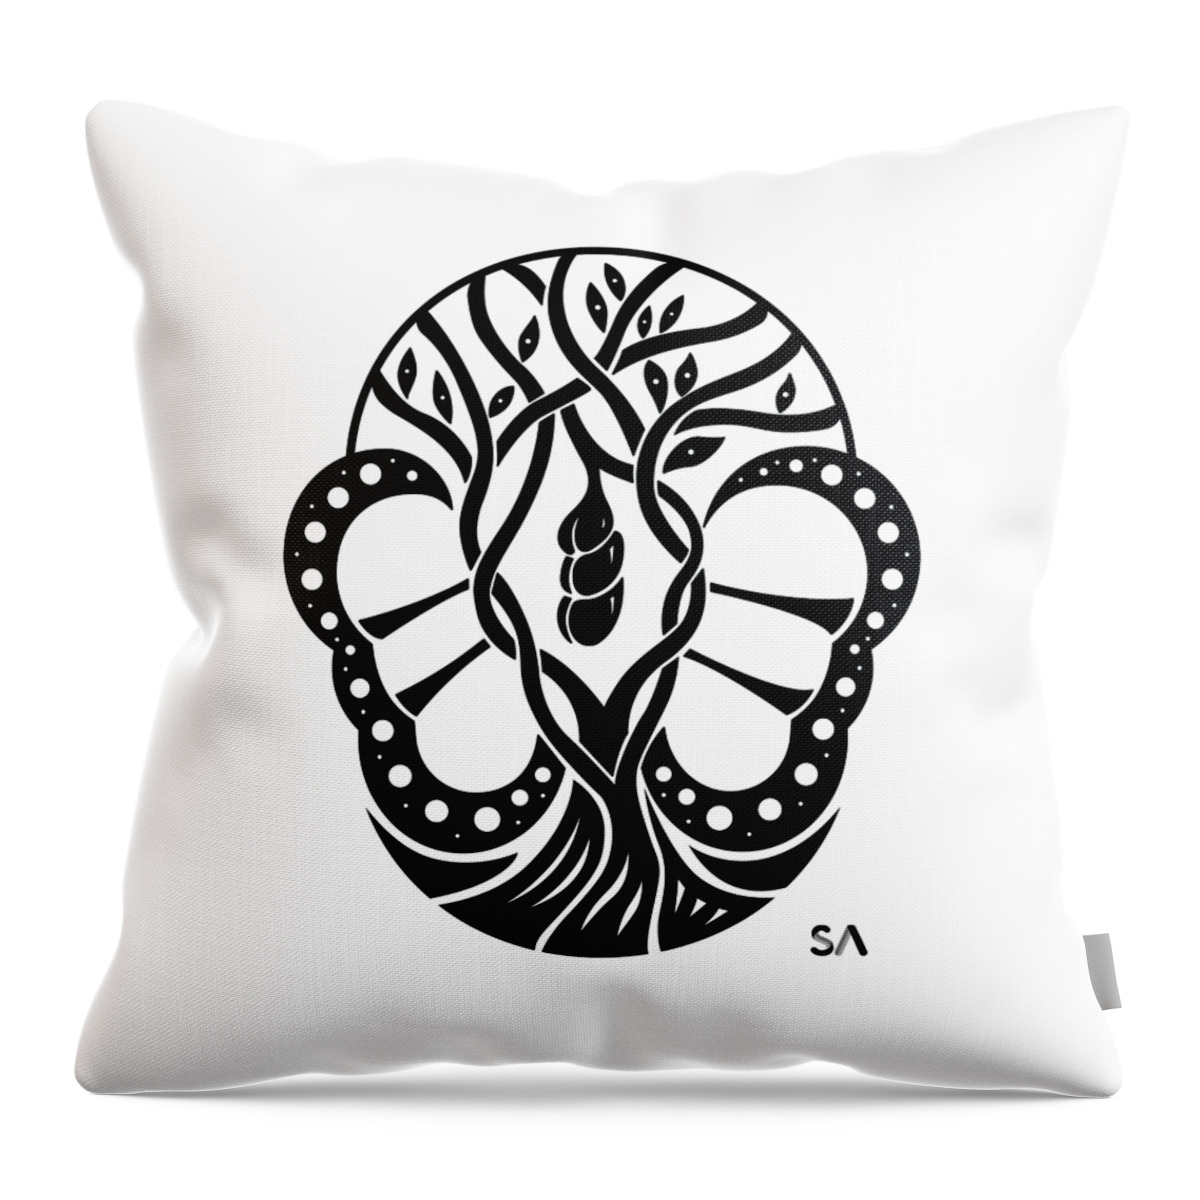 Black And White Throw Pillow featuring the digital art Butterfly by Silvio Ary Cavalcante